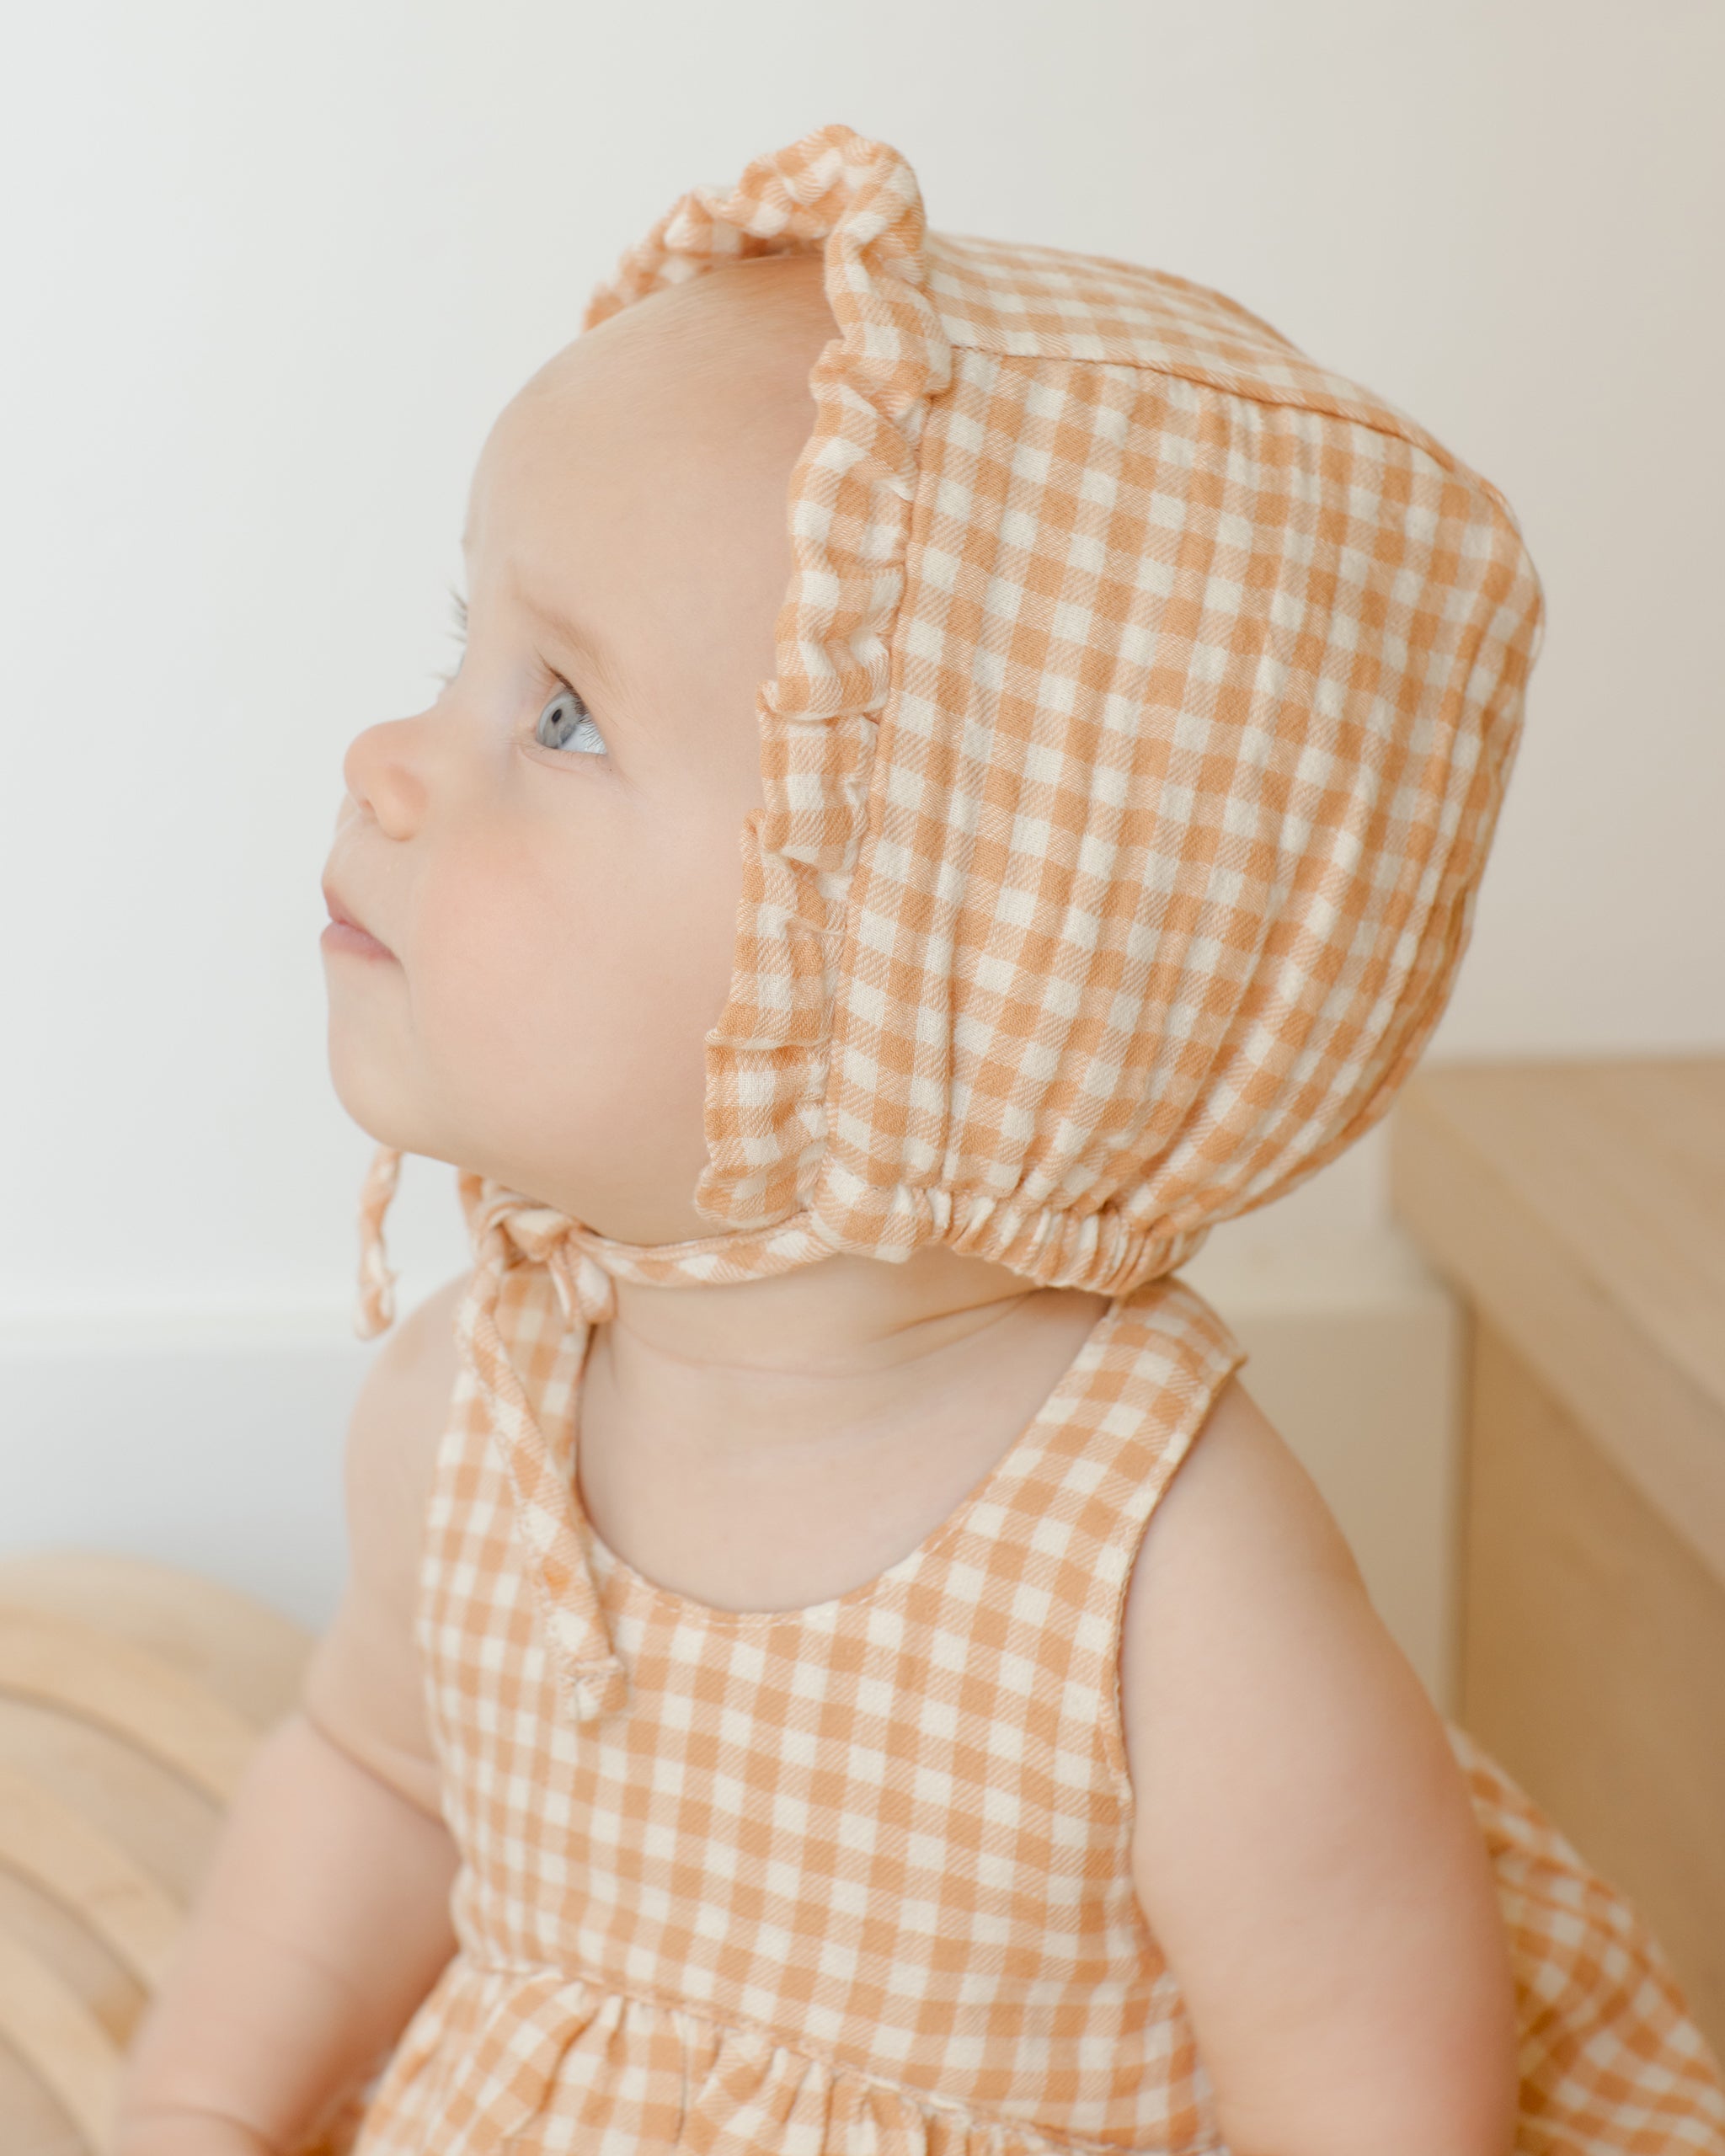 Woven Ruffle Bonnet || Melon Gingham - Rylee + Cru | Kids Clothes | Trendy Baby Clothes | Modern Infant Outfits |